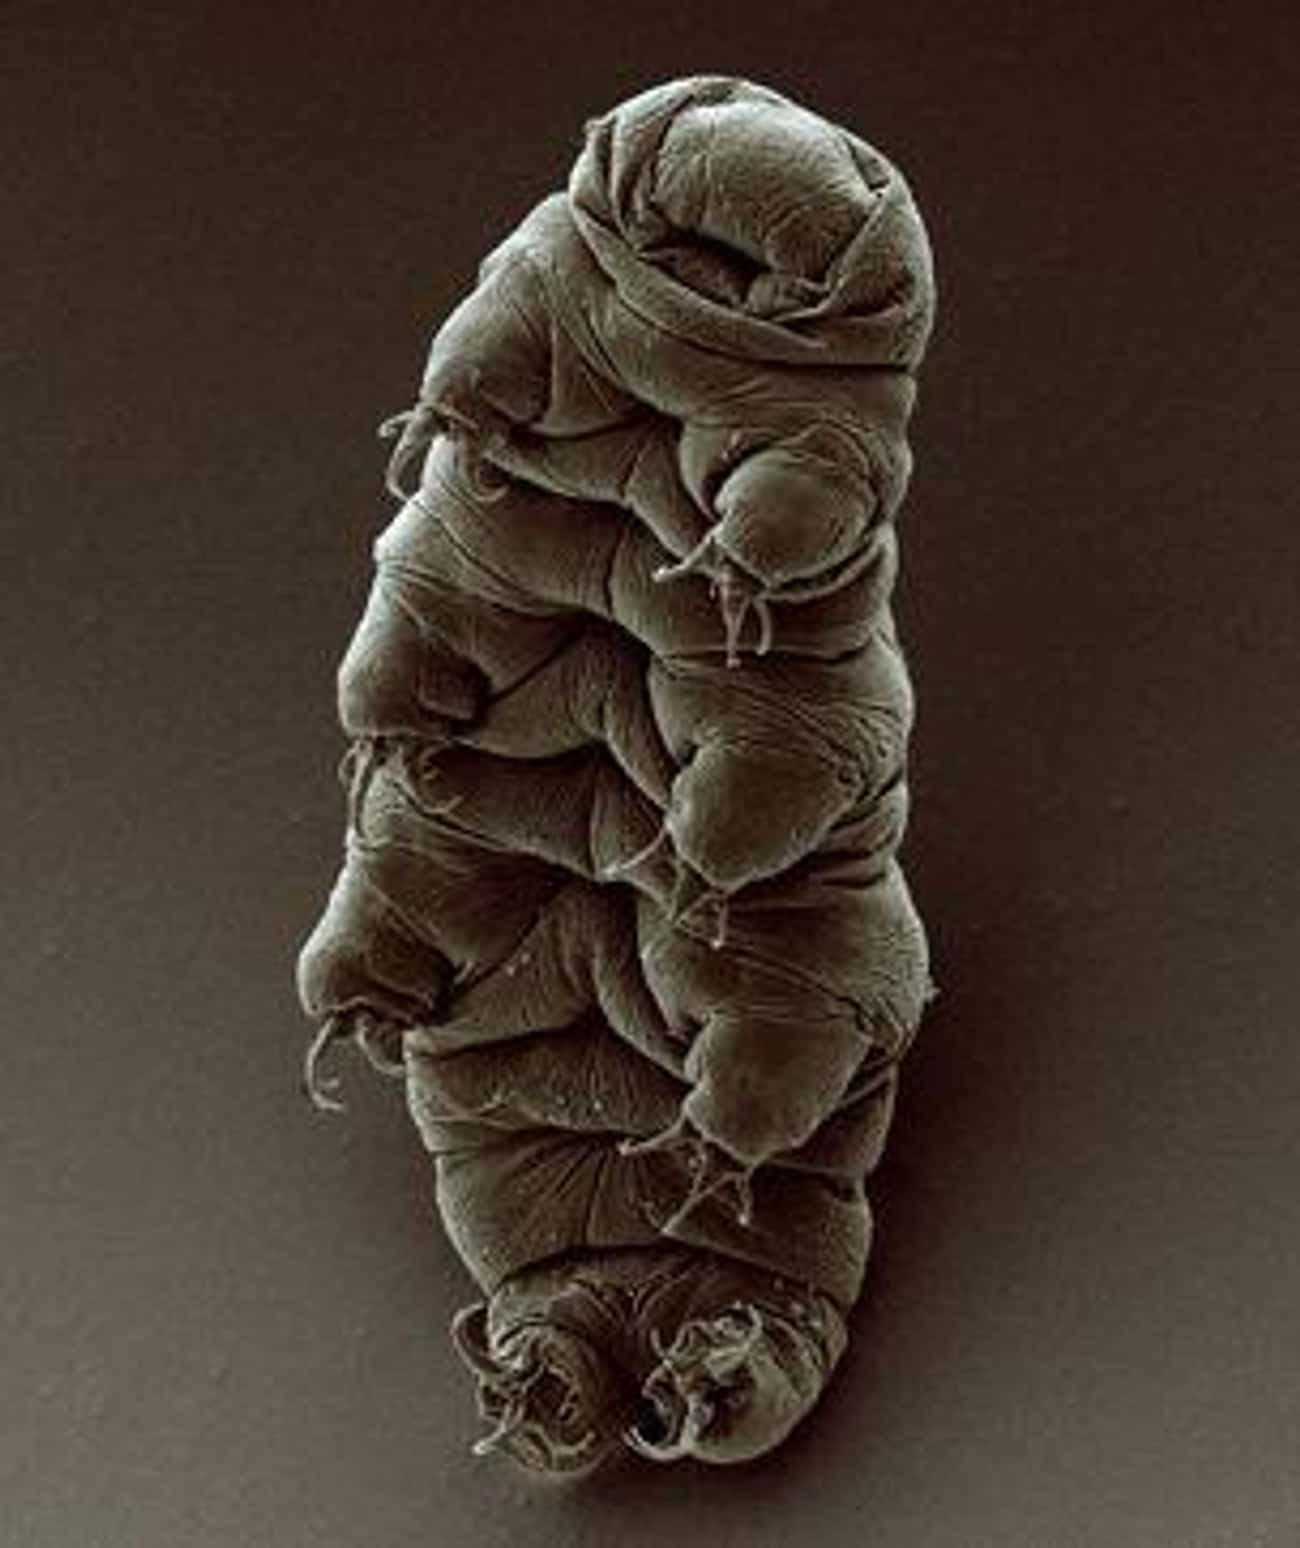 Tardigrades Are The Hardiest Creatures On Earth And Can Survive In Space